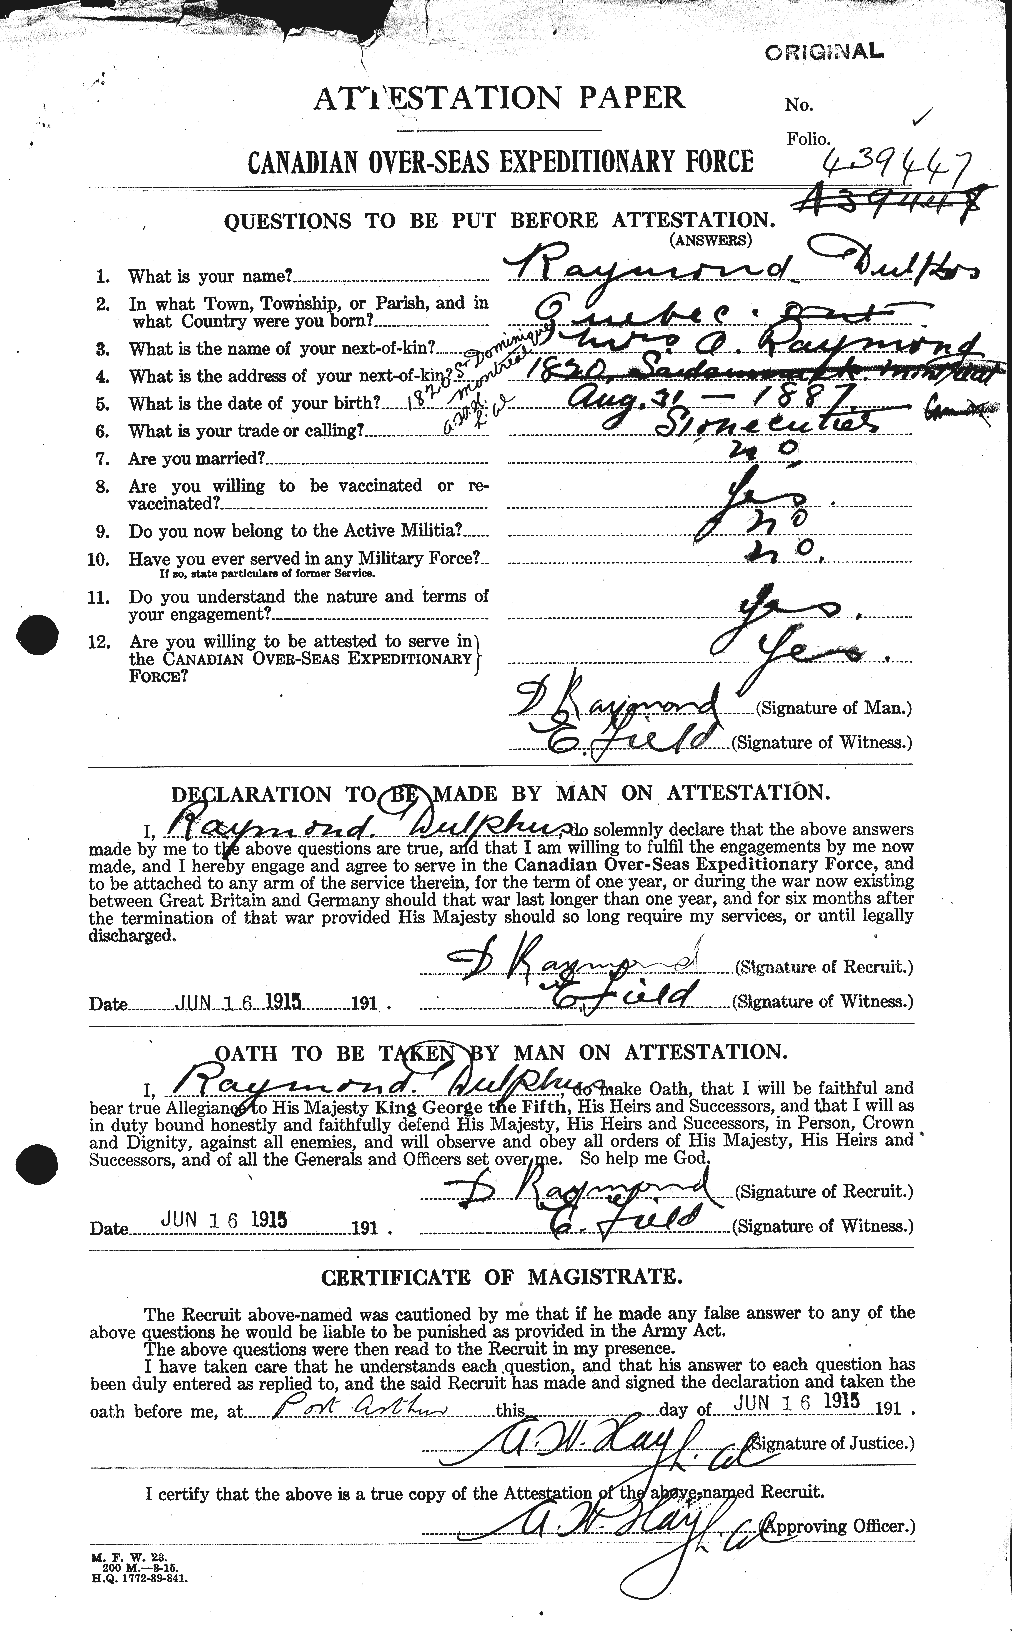 Personnel Records of the First World War - CEF 595303a